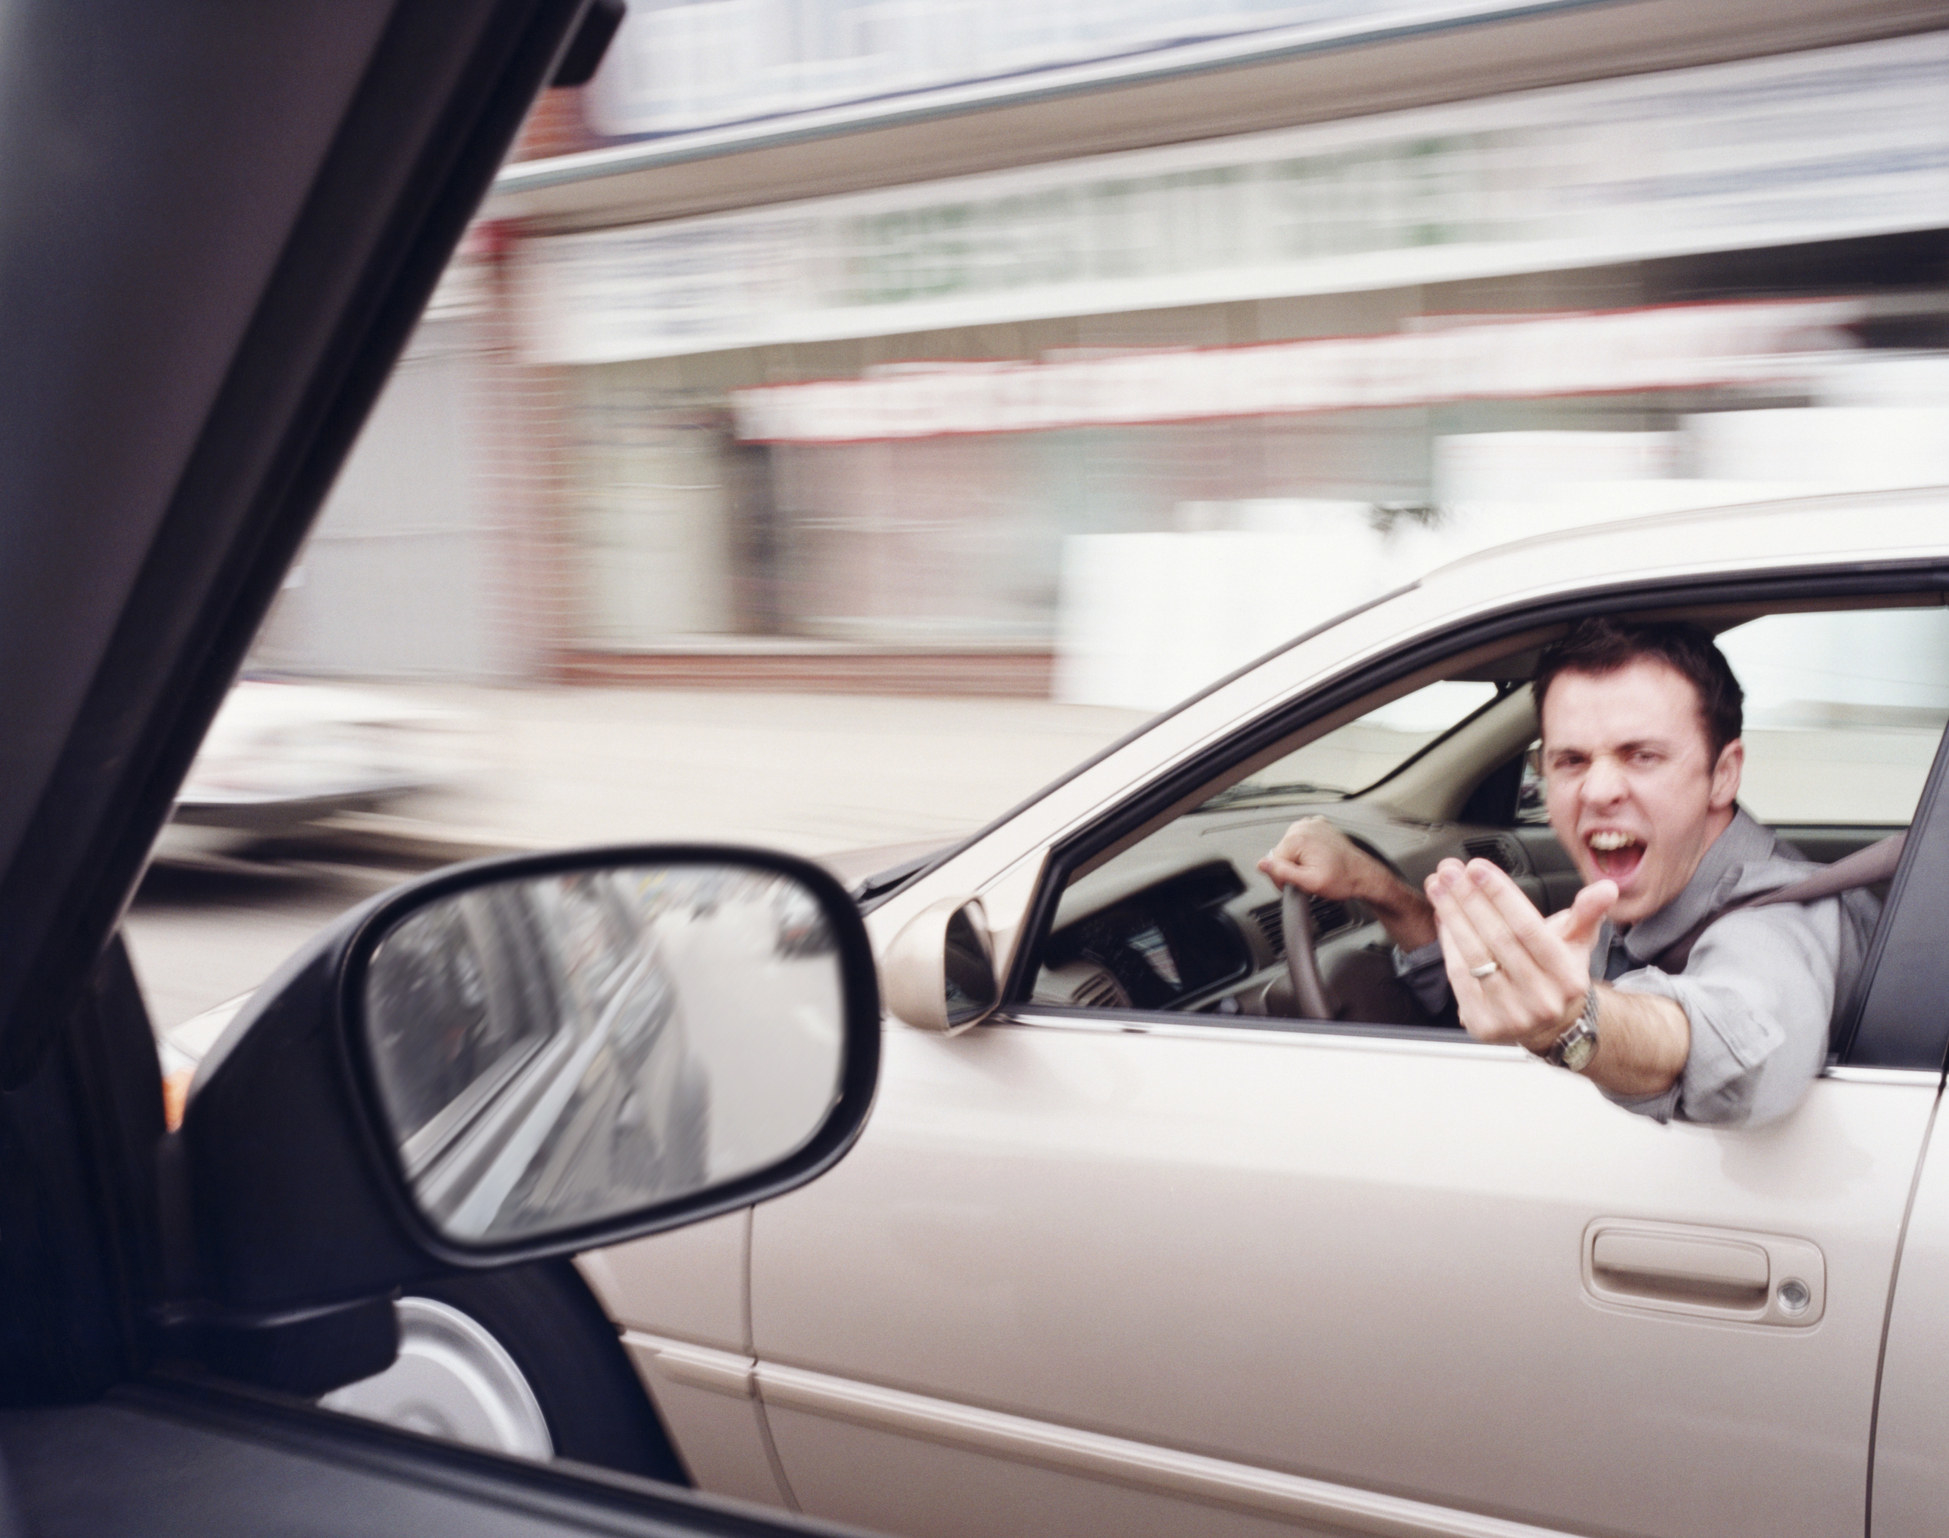 A man yelling at someone from his car